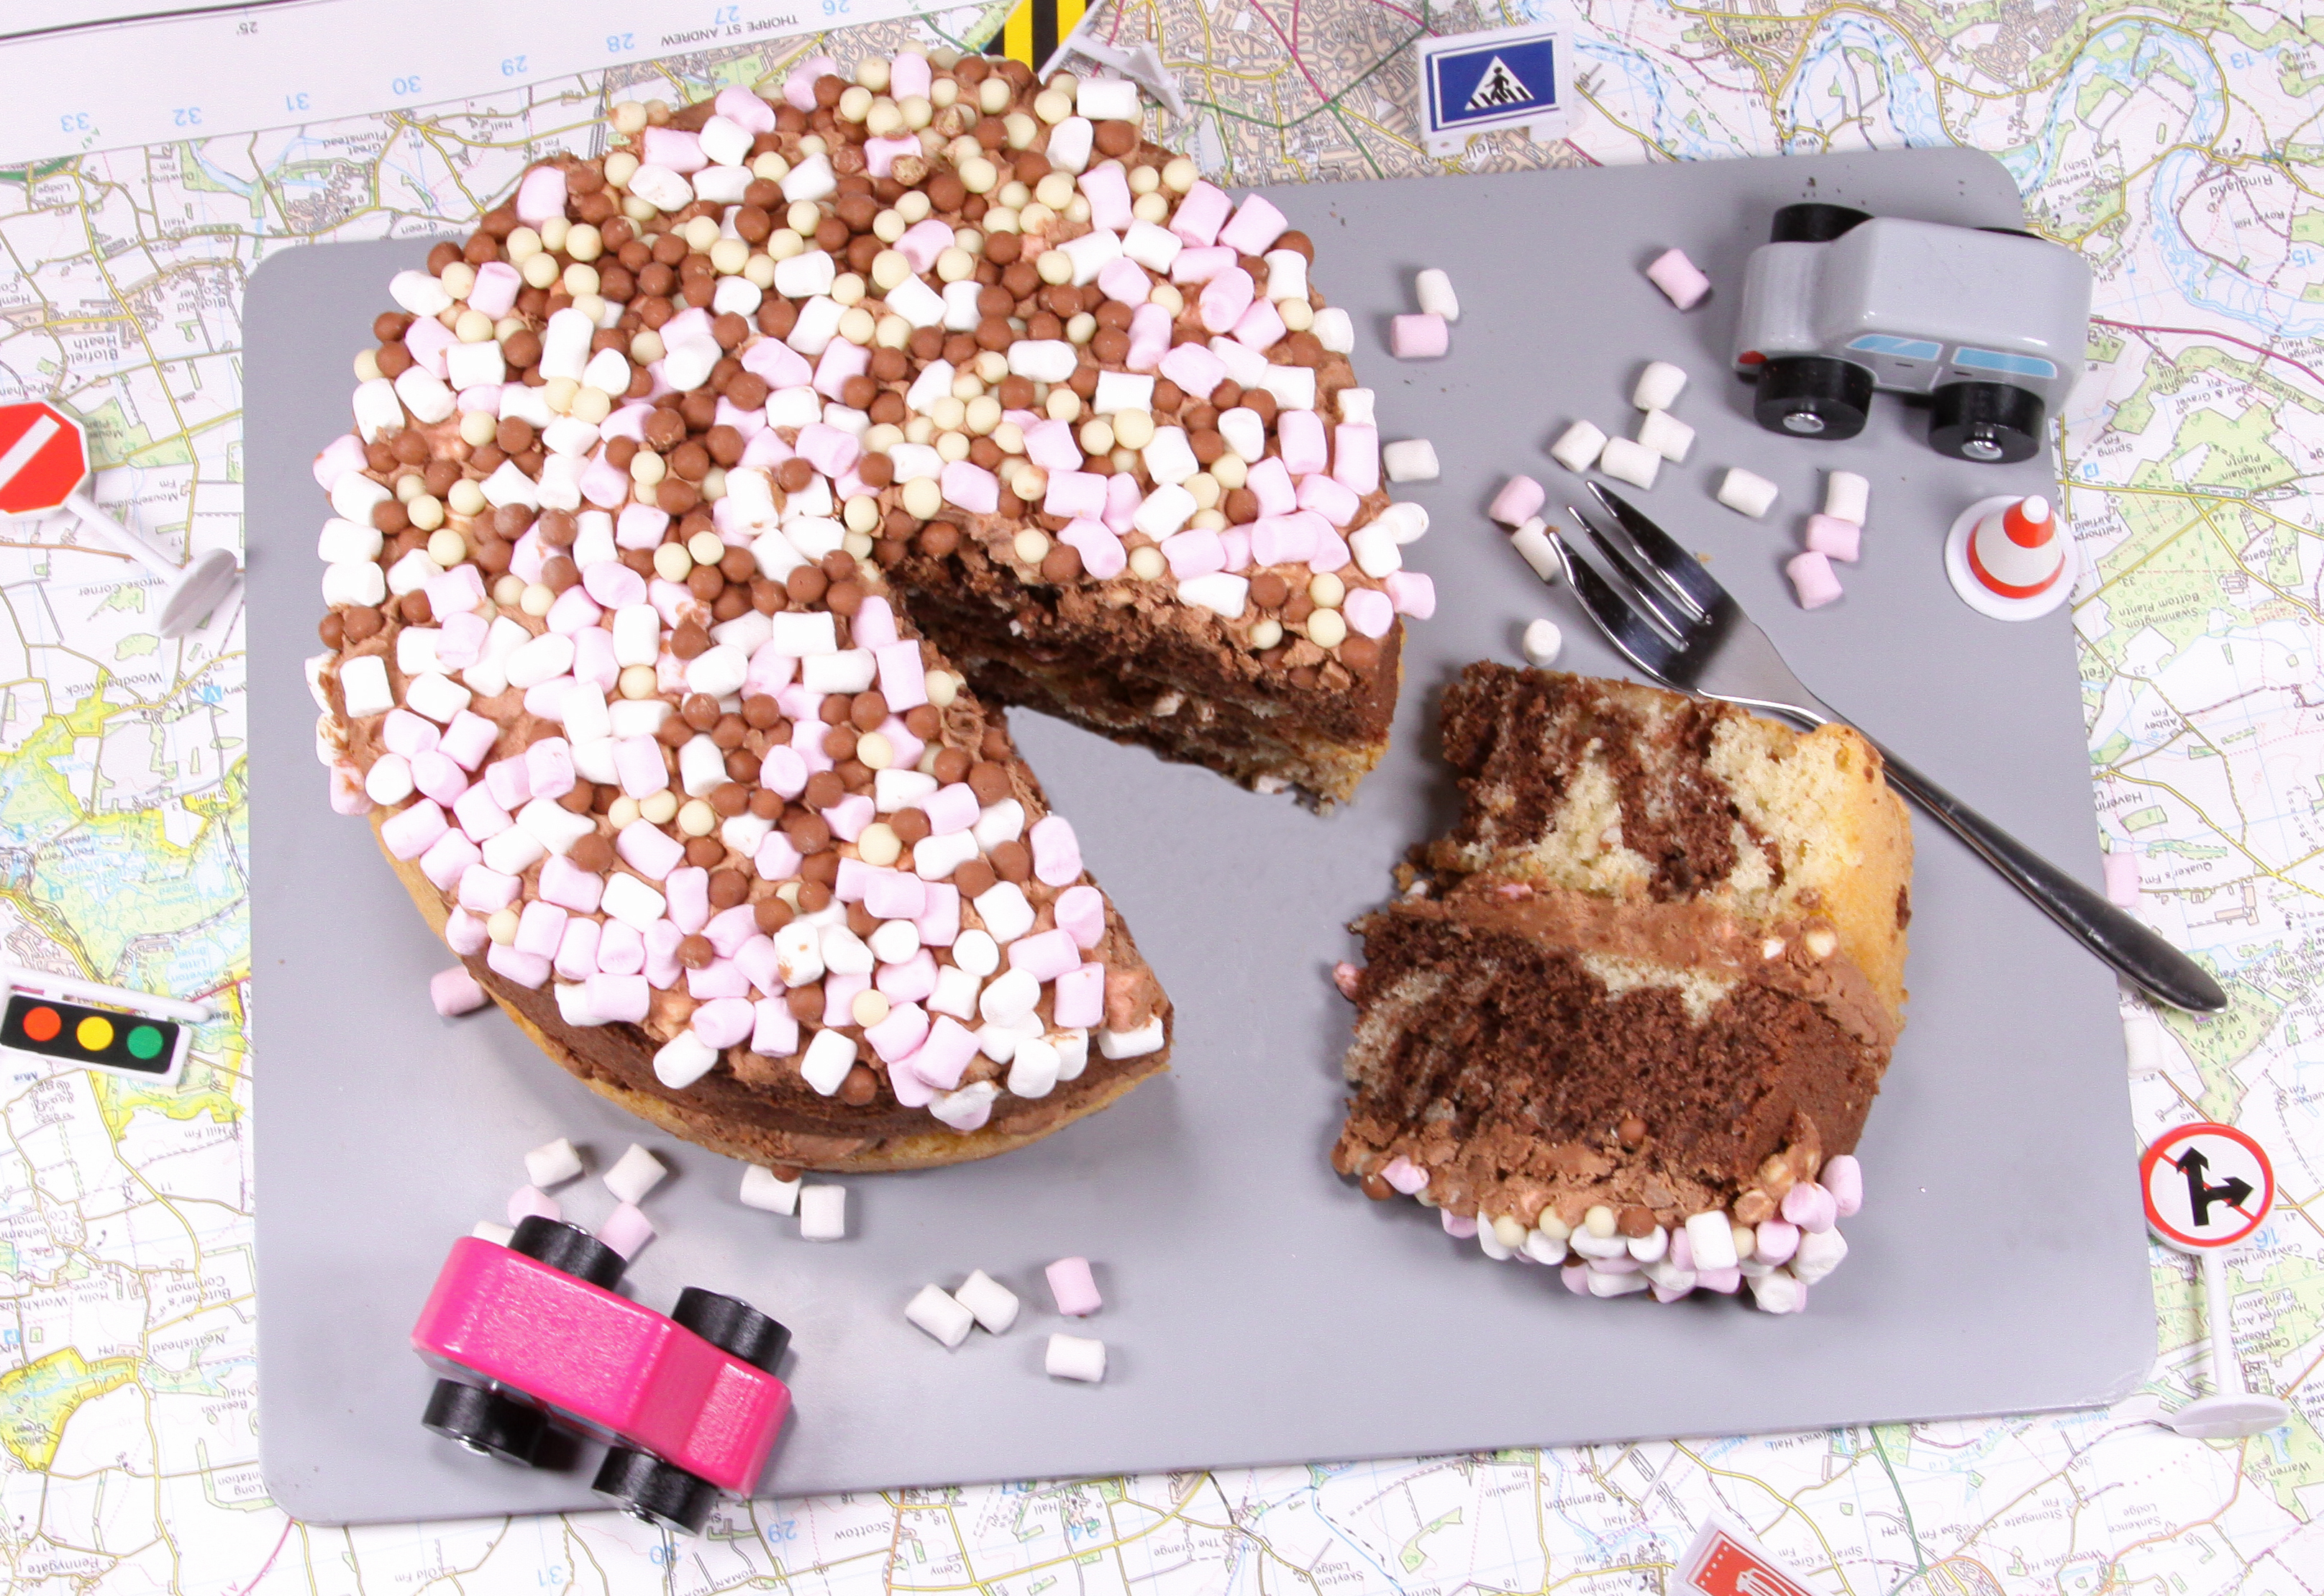 Celebrate the weekend with a Rocky Road Sponge Star Friday! Order by Thursday 2pm for delivery on Friday! £9.99 for a 7 inch Sponge, £16.99 for a 10 inch.